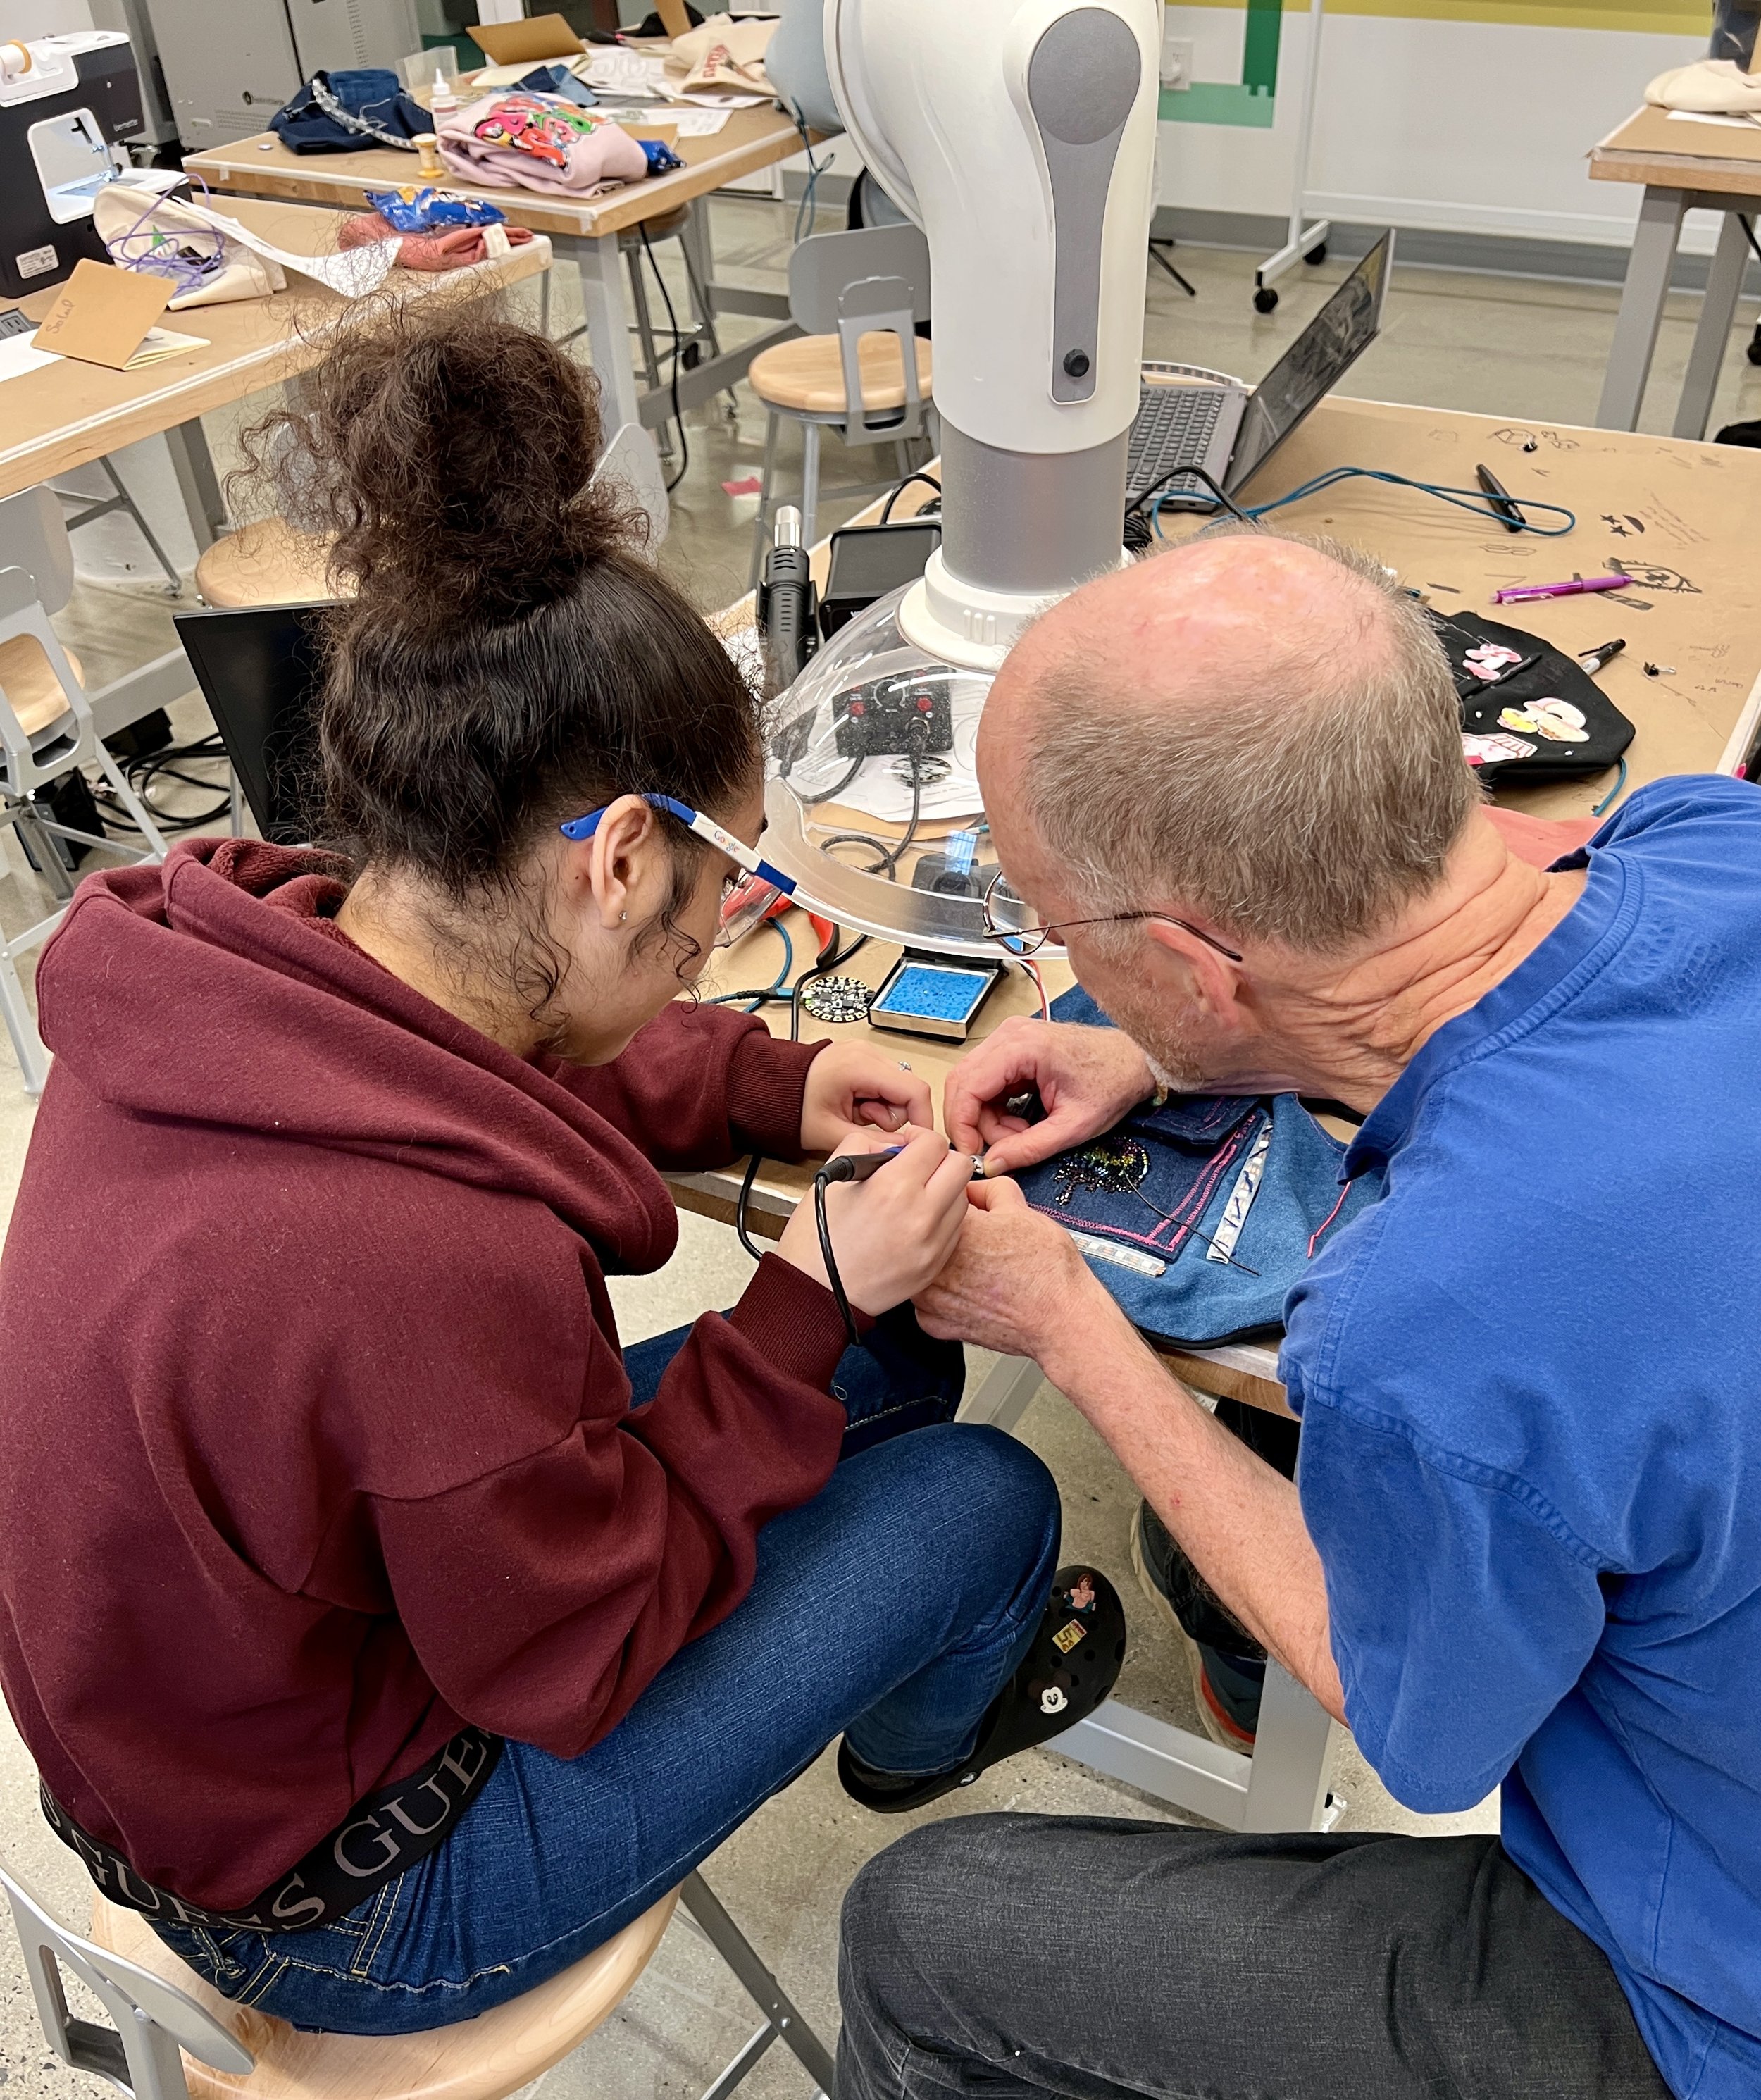  Rob Hart, in the blue shirt, leans in to help a student with an e-textiles project at the lab's workbench, surrounded by tools and materials for crafting and innovation. 